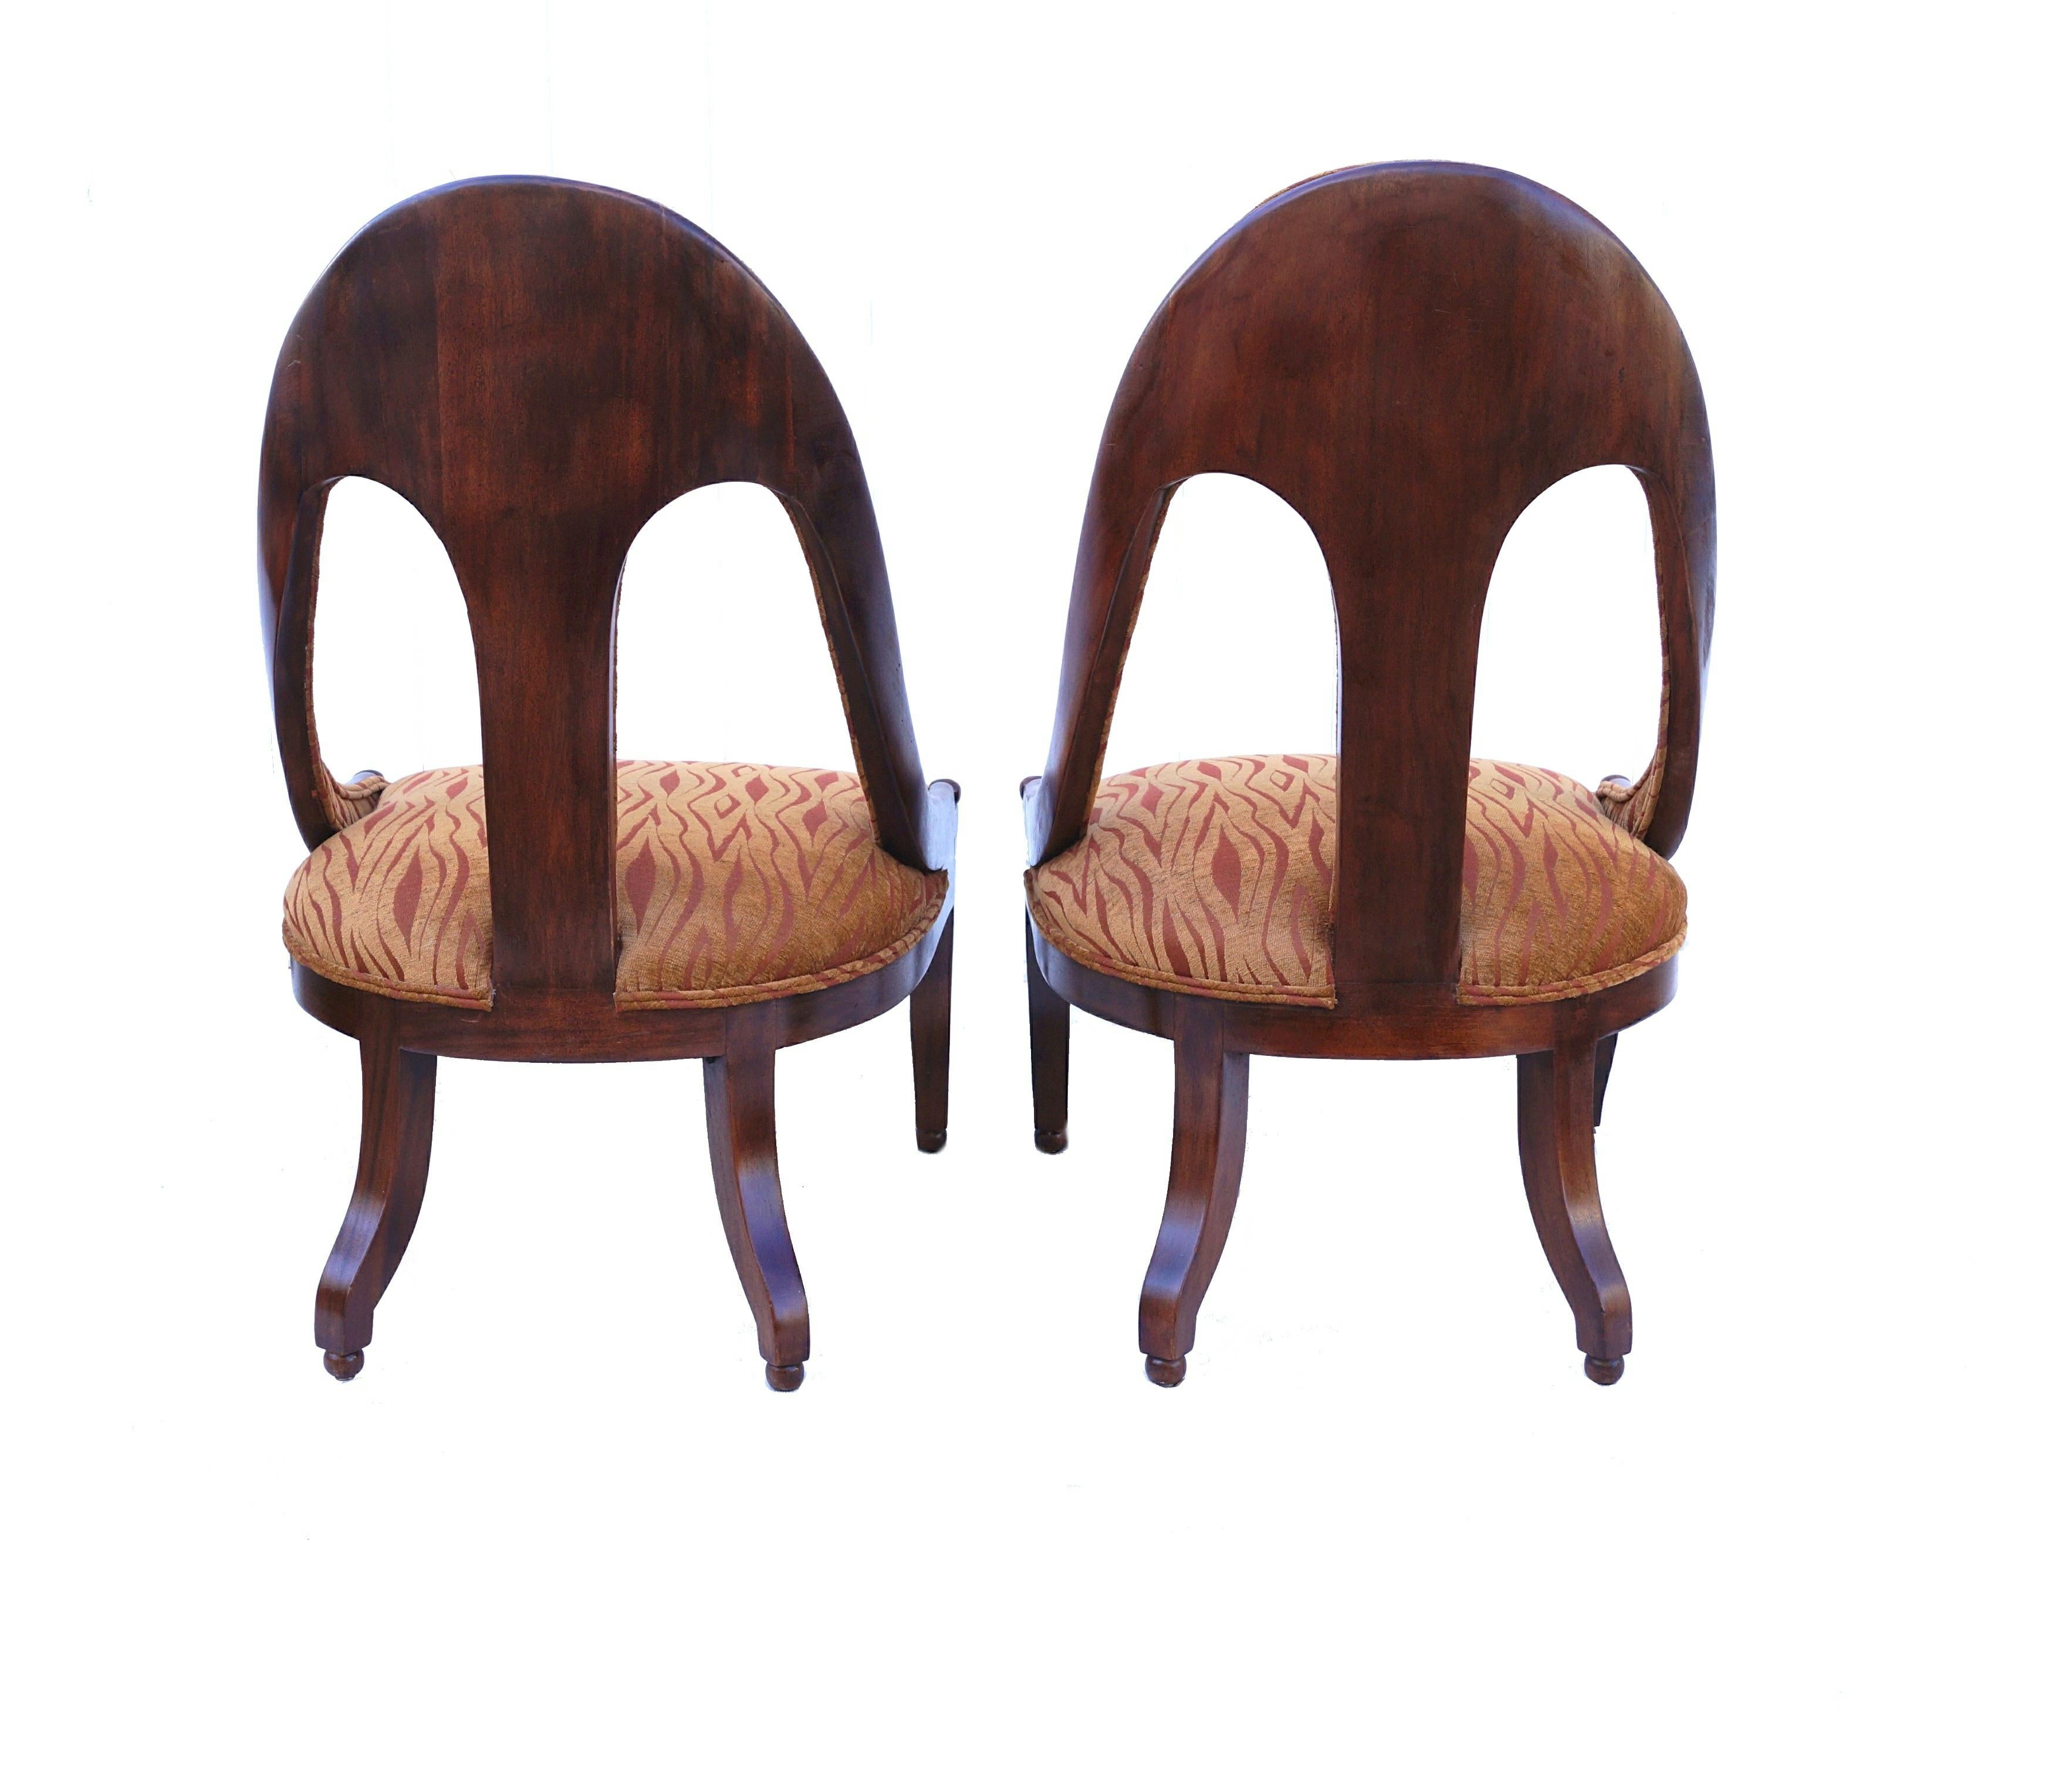 Mid-Century Modern Pair of Michael Taylor for Baker Midcentury Spoon Back Slipper Lounge Chairs